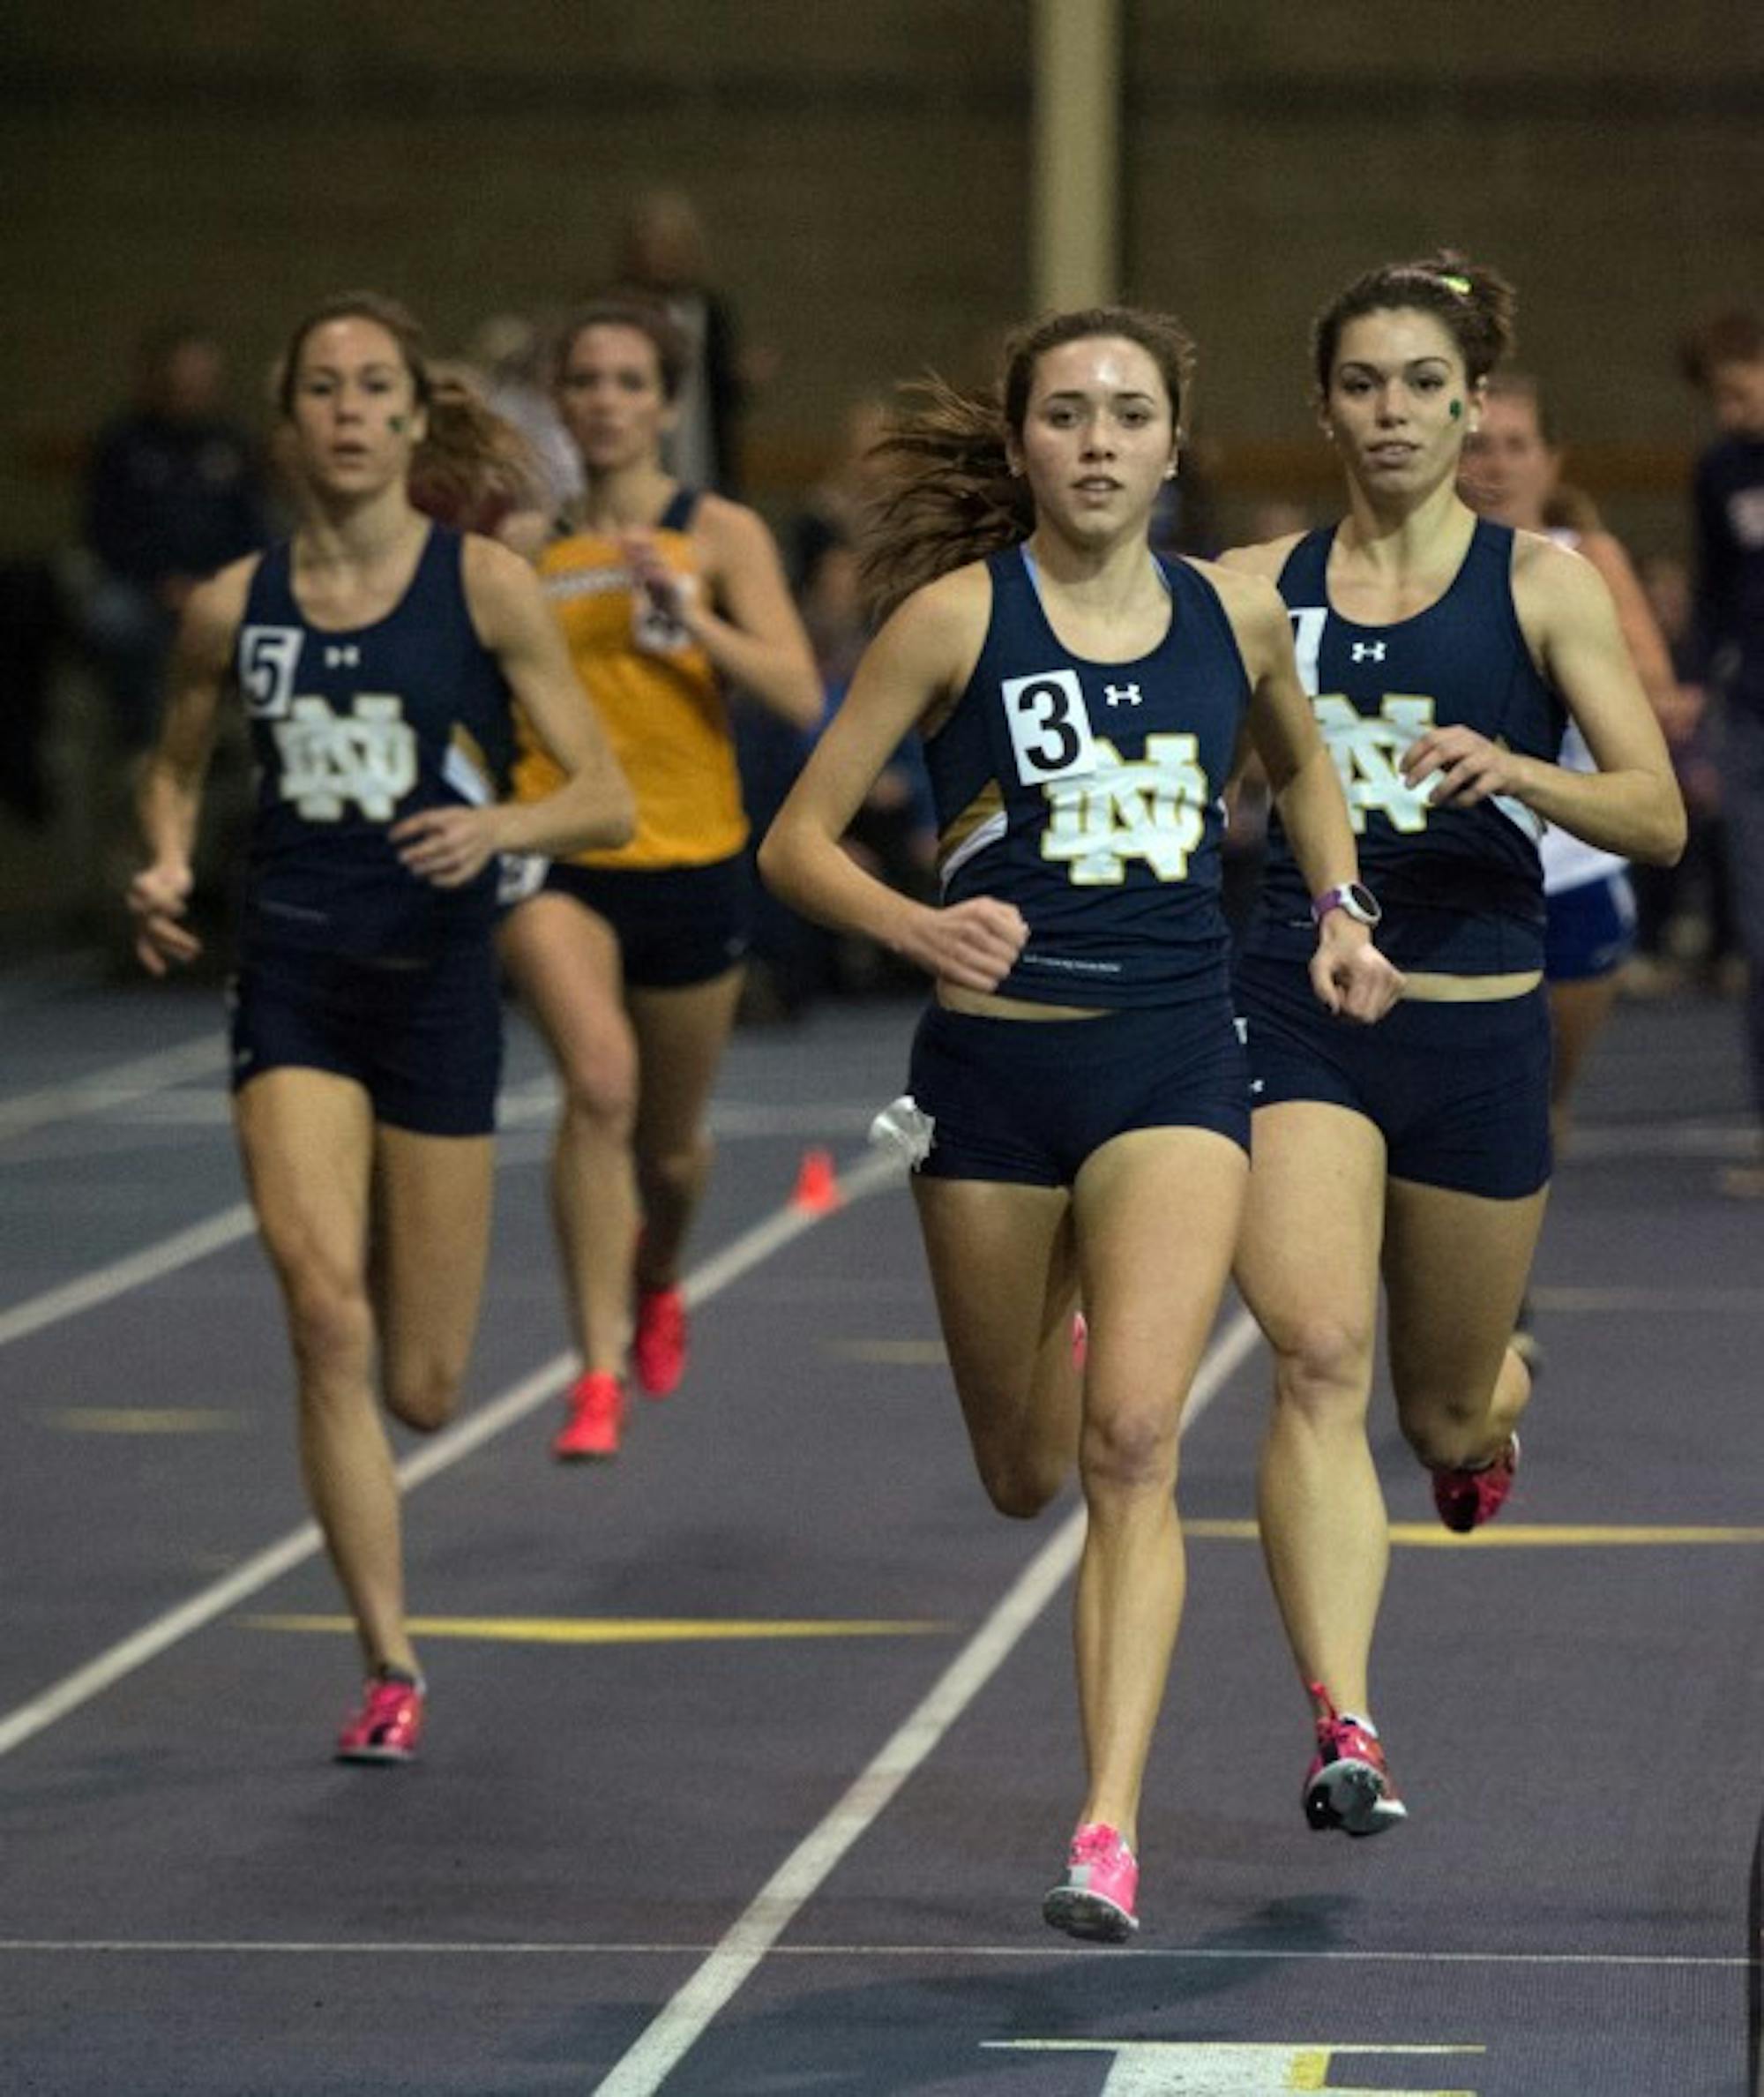 Senior middle distance runner Danielle Aragon, center, paces the Irish during Notre Dame’s Blue and Gold Invitational on December 5, 2014. She will compete in this weekend’s Notre Dame Invitational.